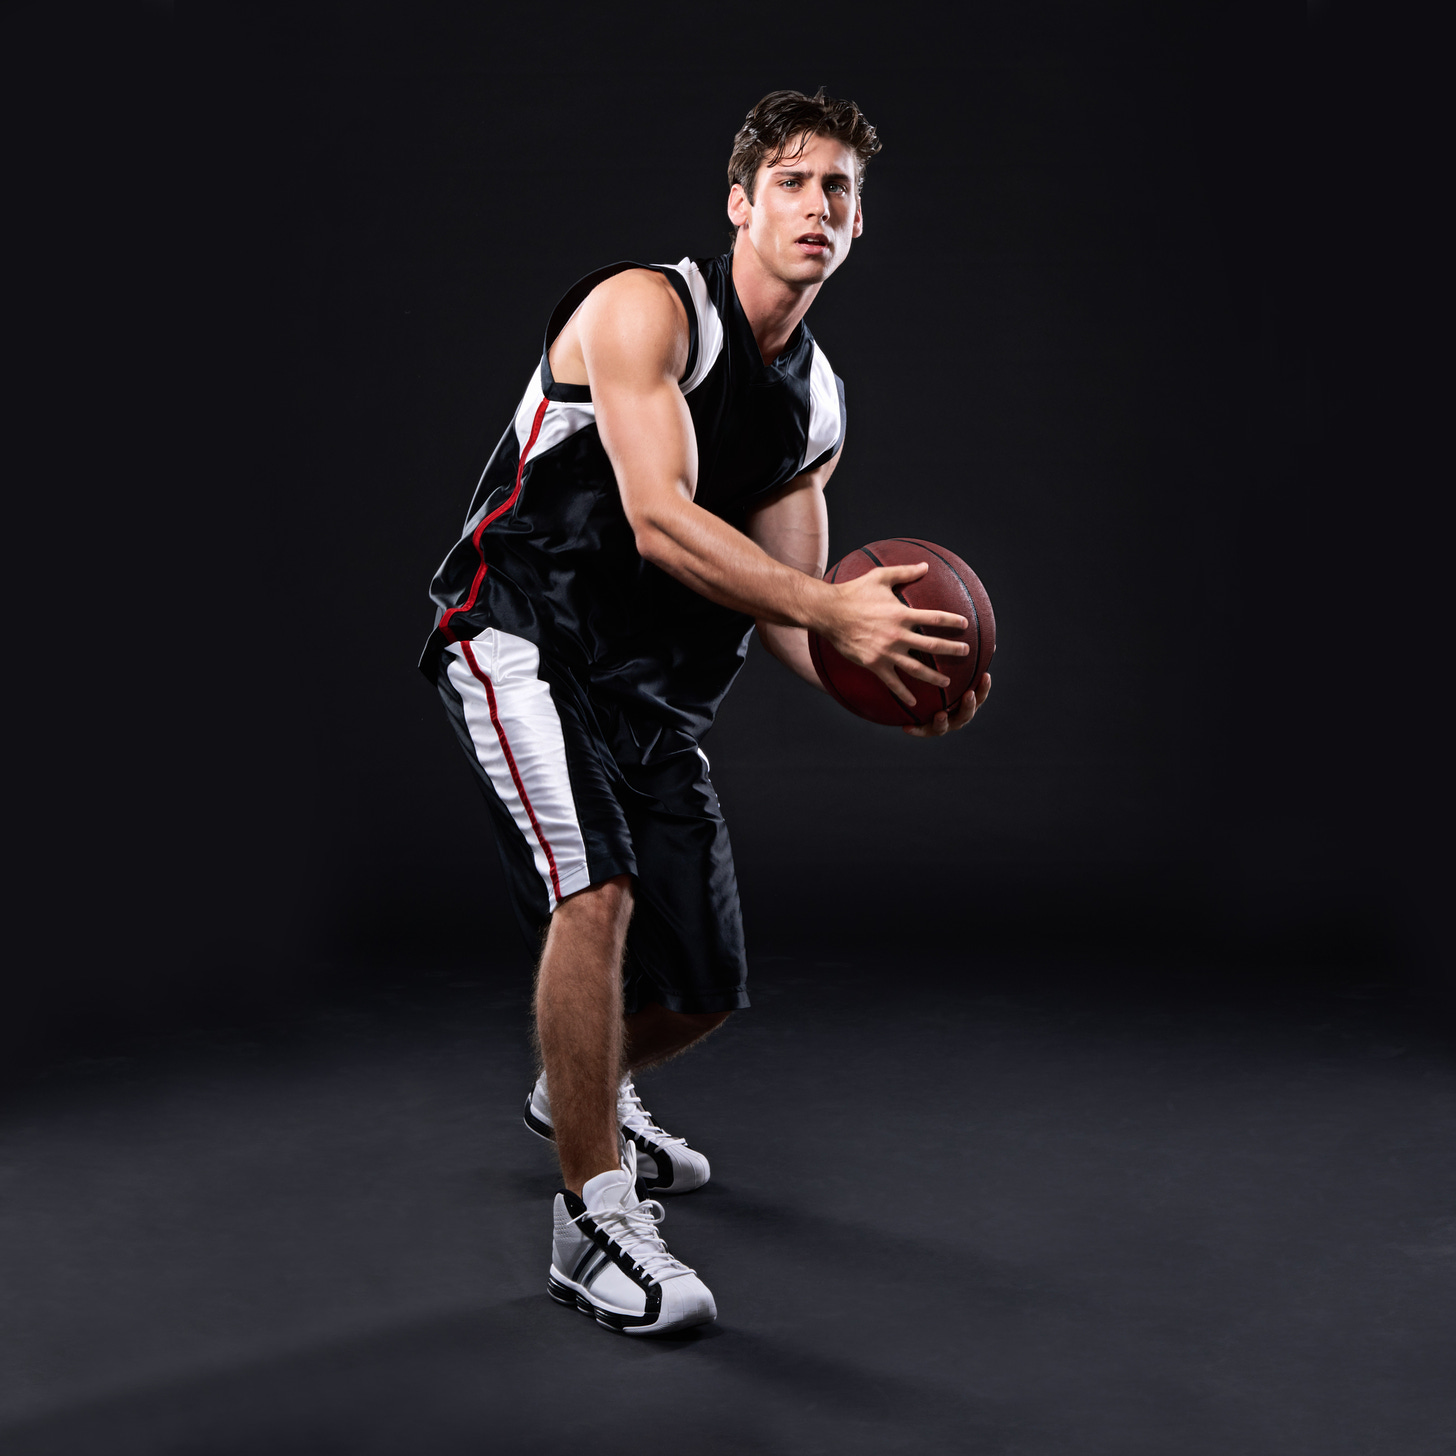 A picture of a male basketball player of unknown gender identity but he could, like, be a diversely-bodied woman